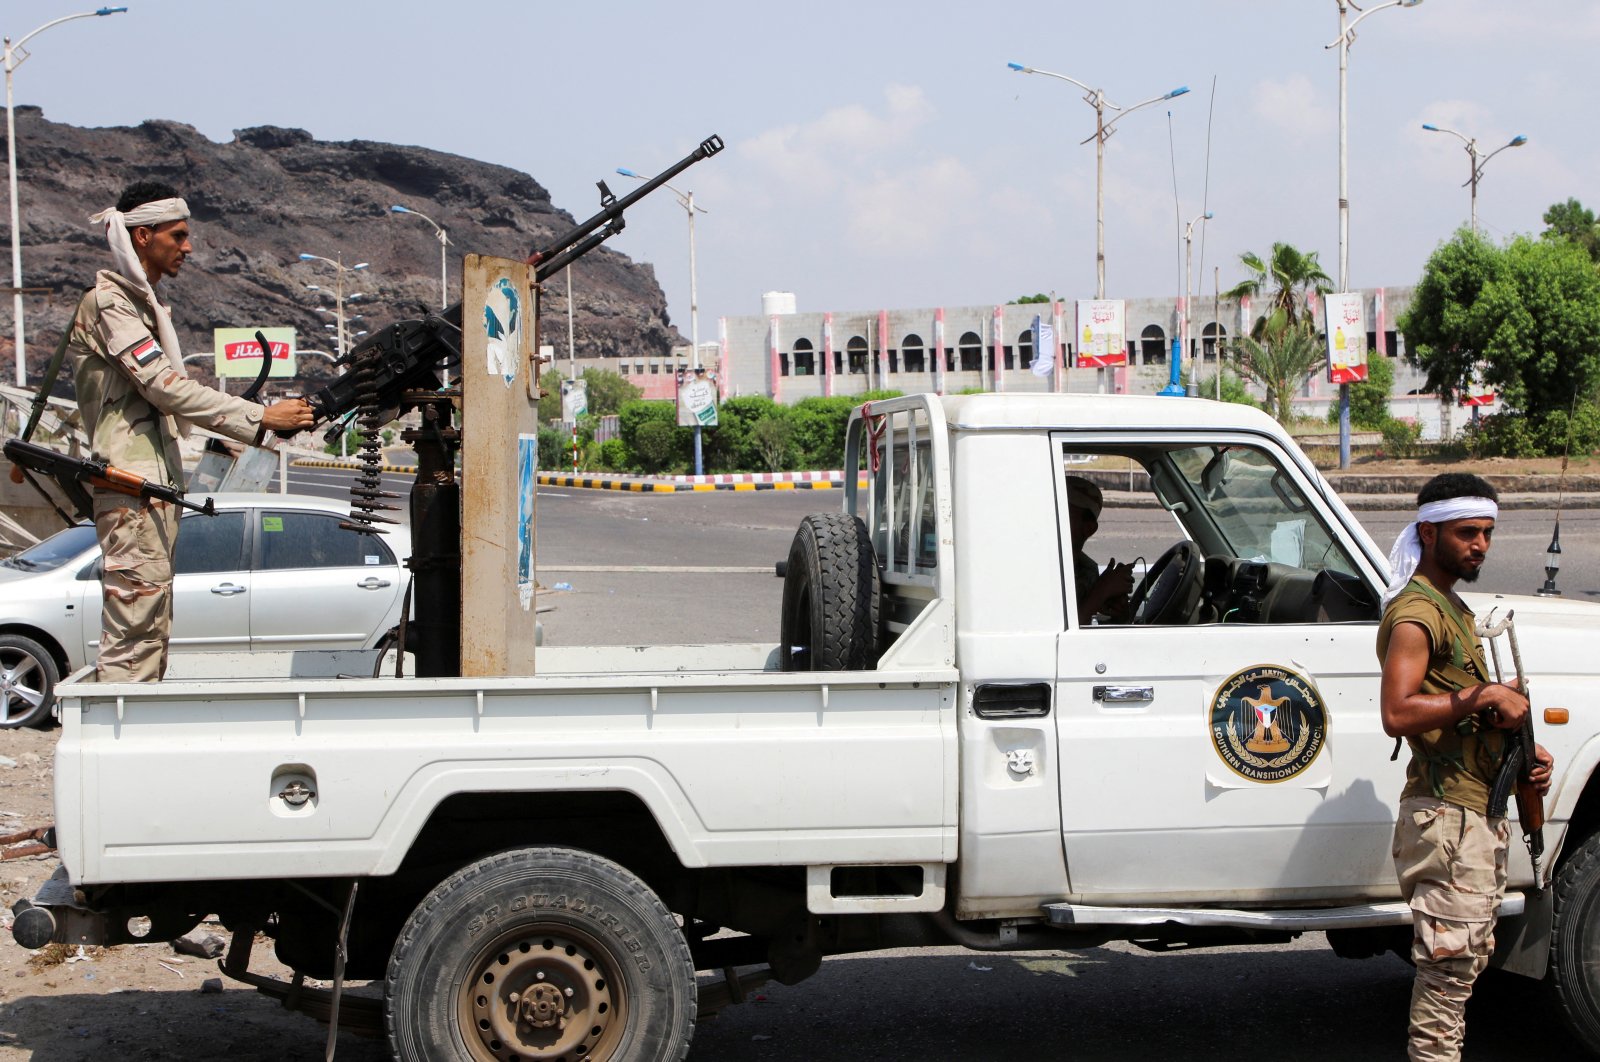 Members of the separatist Southern Transitional Council (STC) man a checkpoint in Aden, Yemen, Oct. 2, 2021. (Reuters Photo)